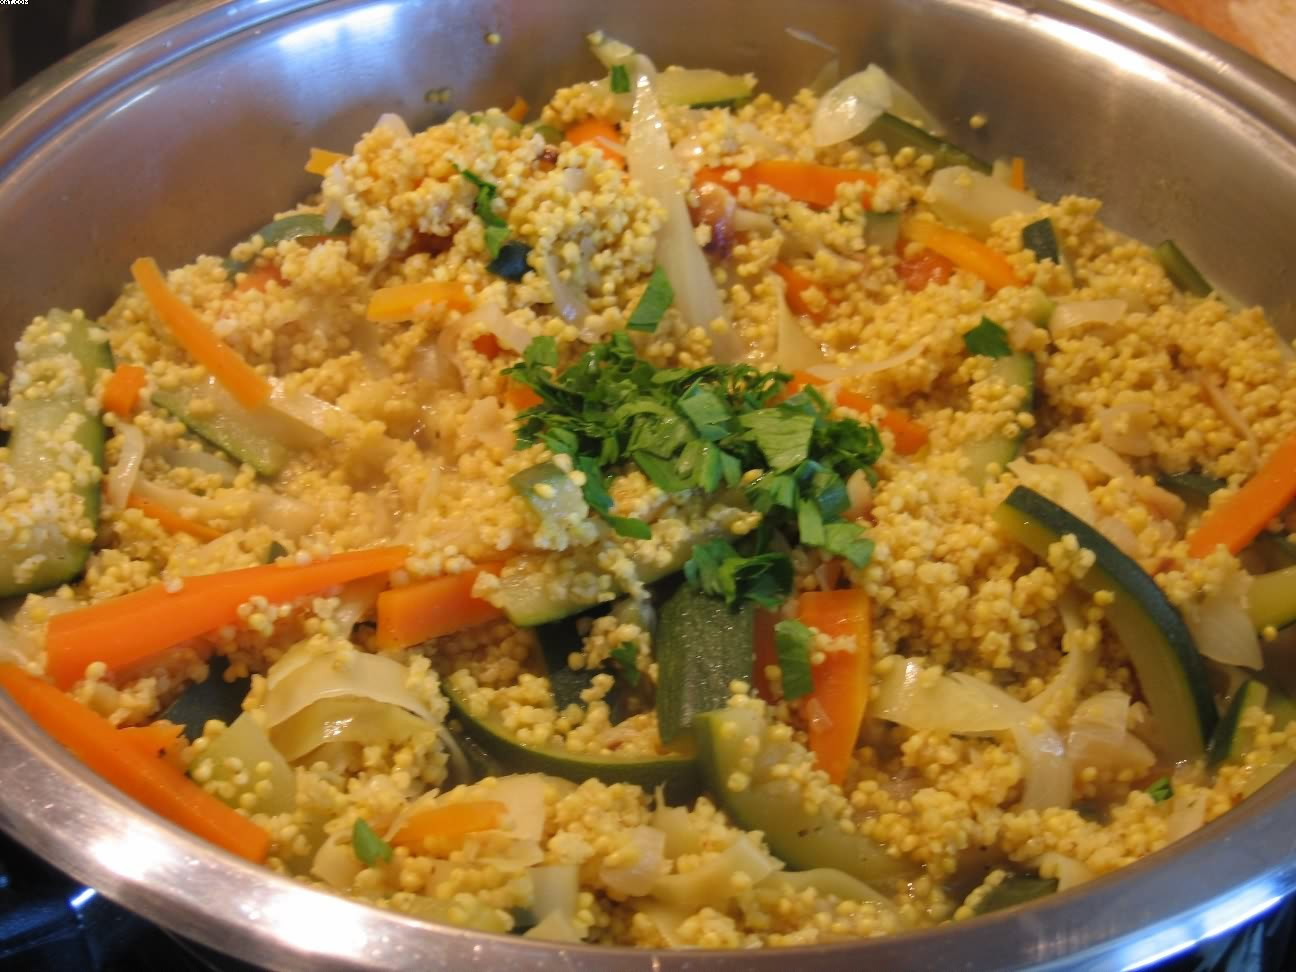 Millet risotto with vegetables